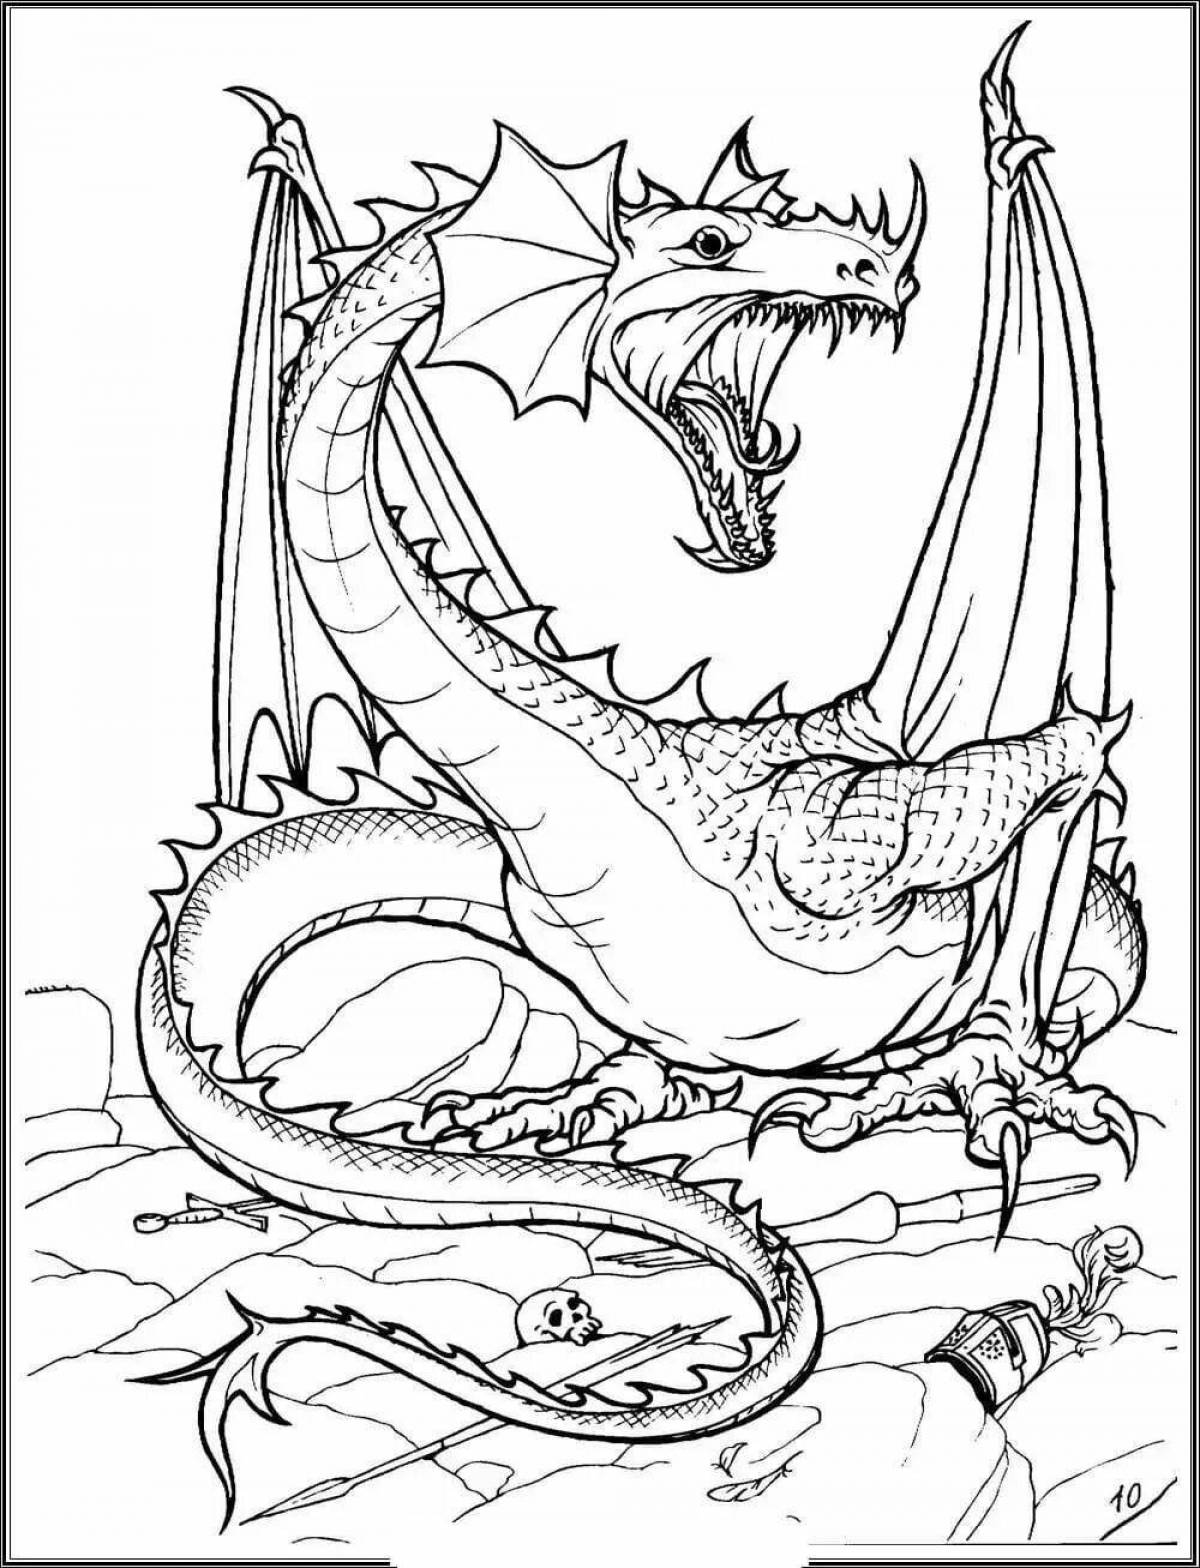 Royal year of the dragon coloring book